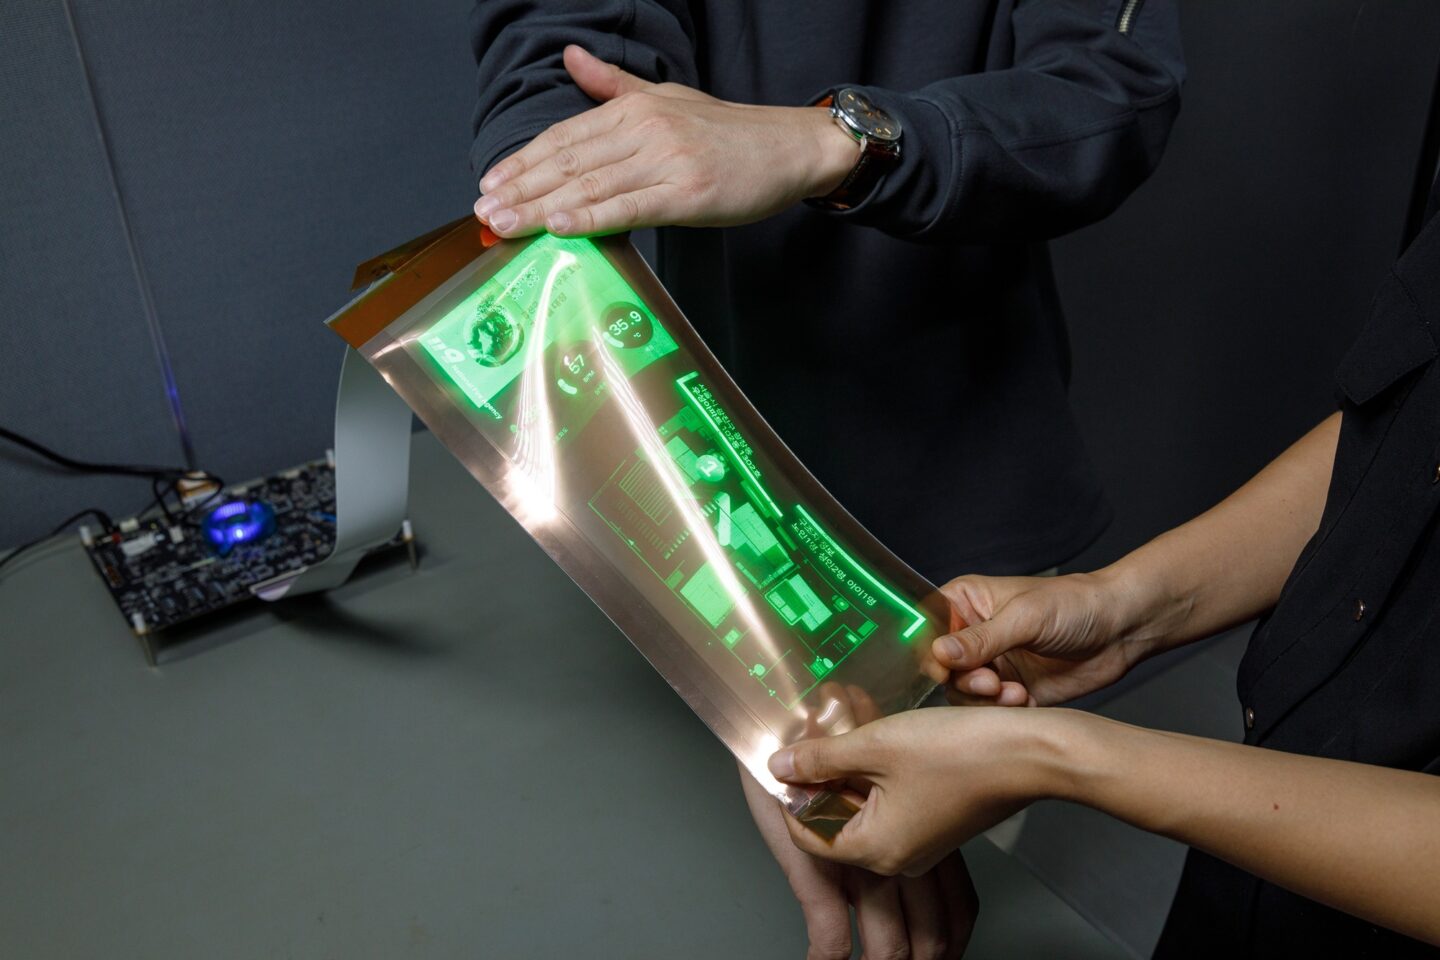 LG Display showed the world's first flexible display that can be stretched